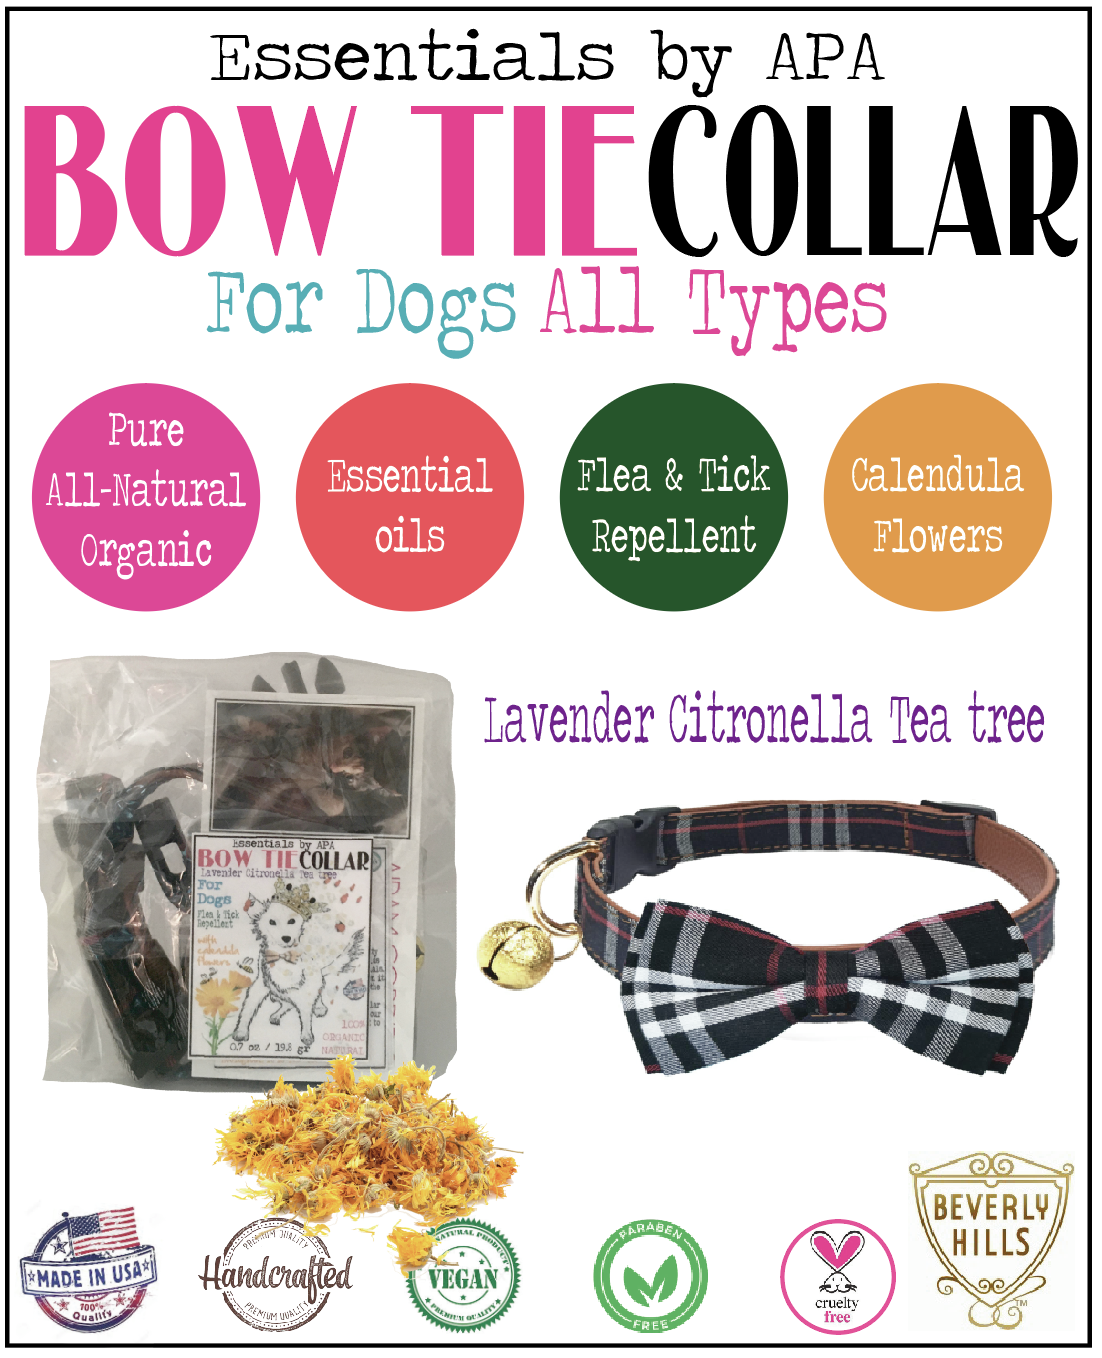 🐕 ⧓ Flea & Tick repellent Burberry plaid Bow tie Dog collar with Breakaway buckle Organic Essential Oil Scented Adjustable Movable (S,M,L)